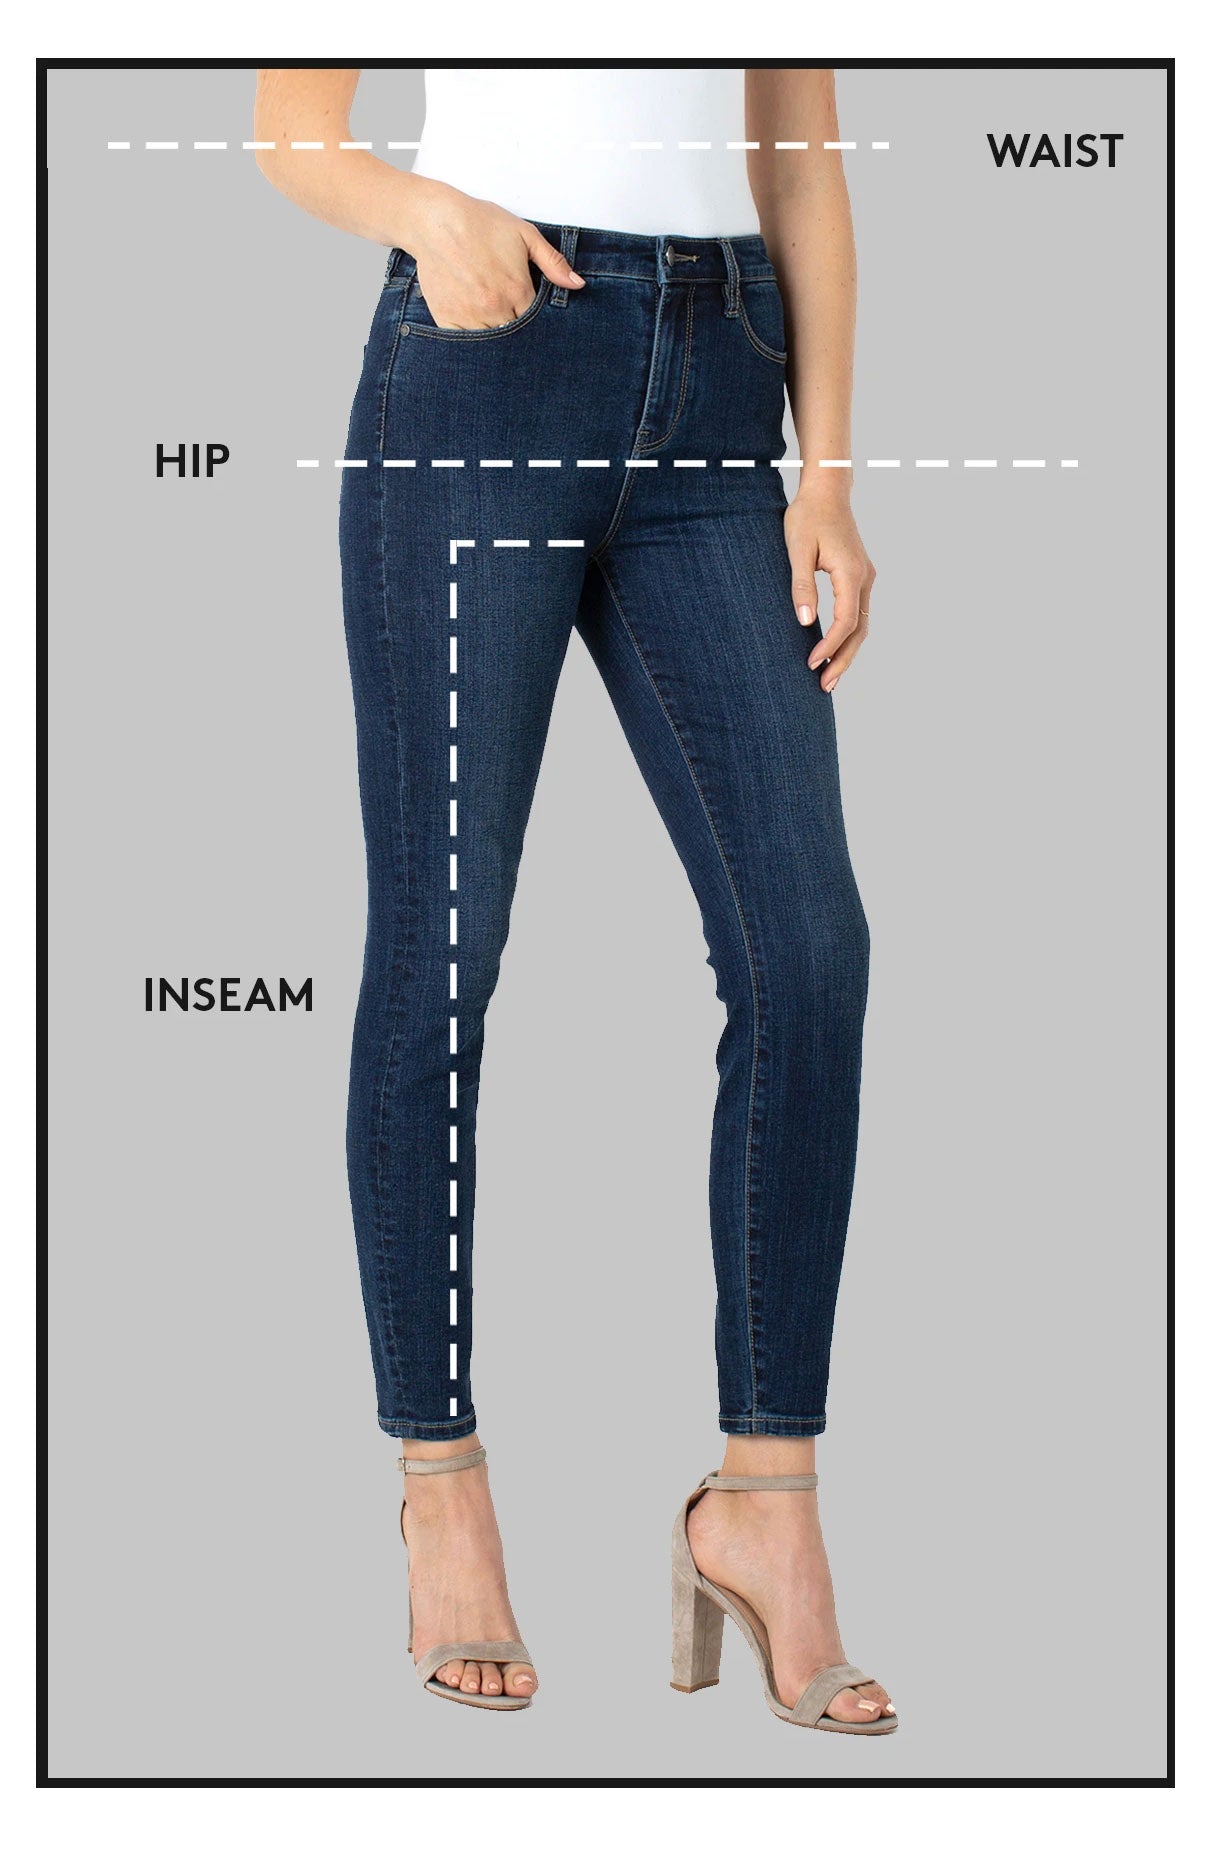 How to Measure Waist Hip and Inseam